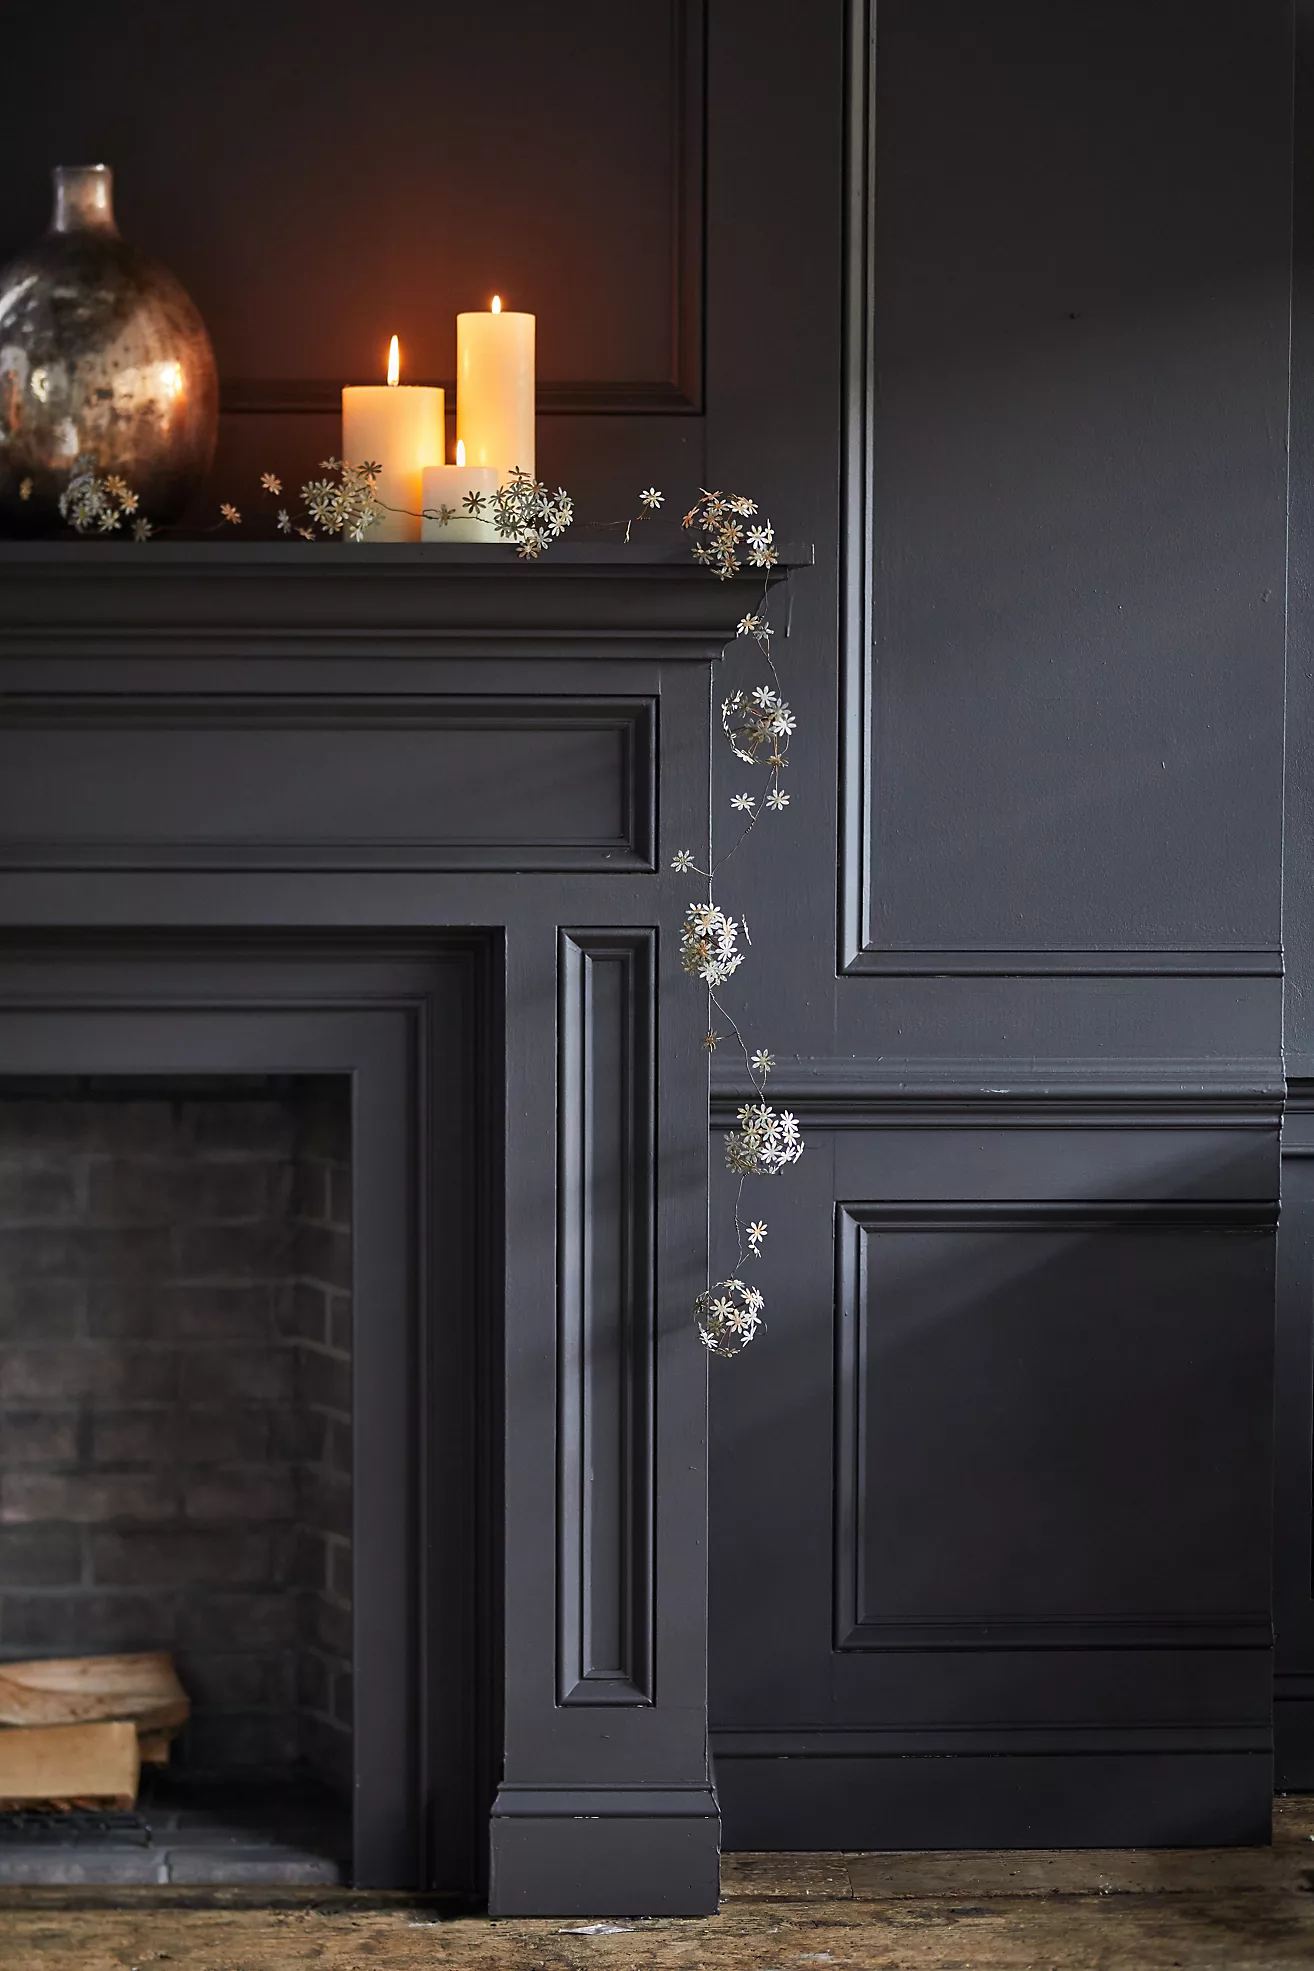 Drape Your Mantel in A Decorative Garland